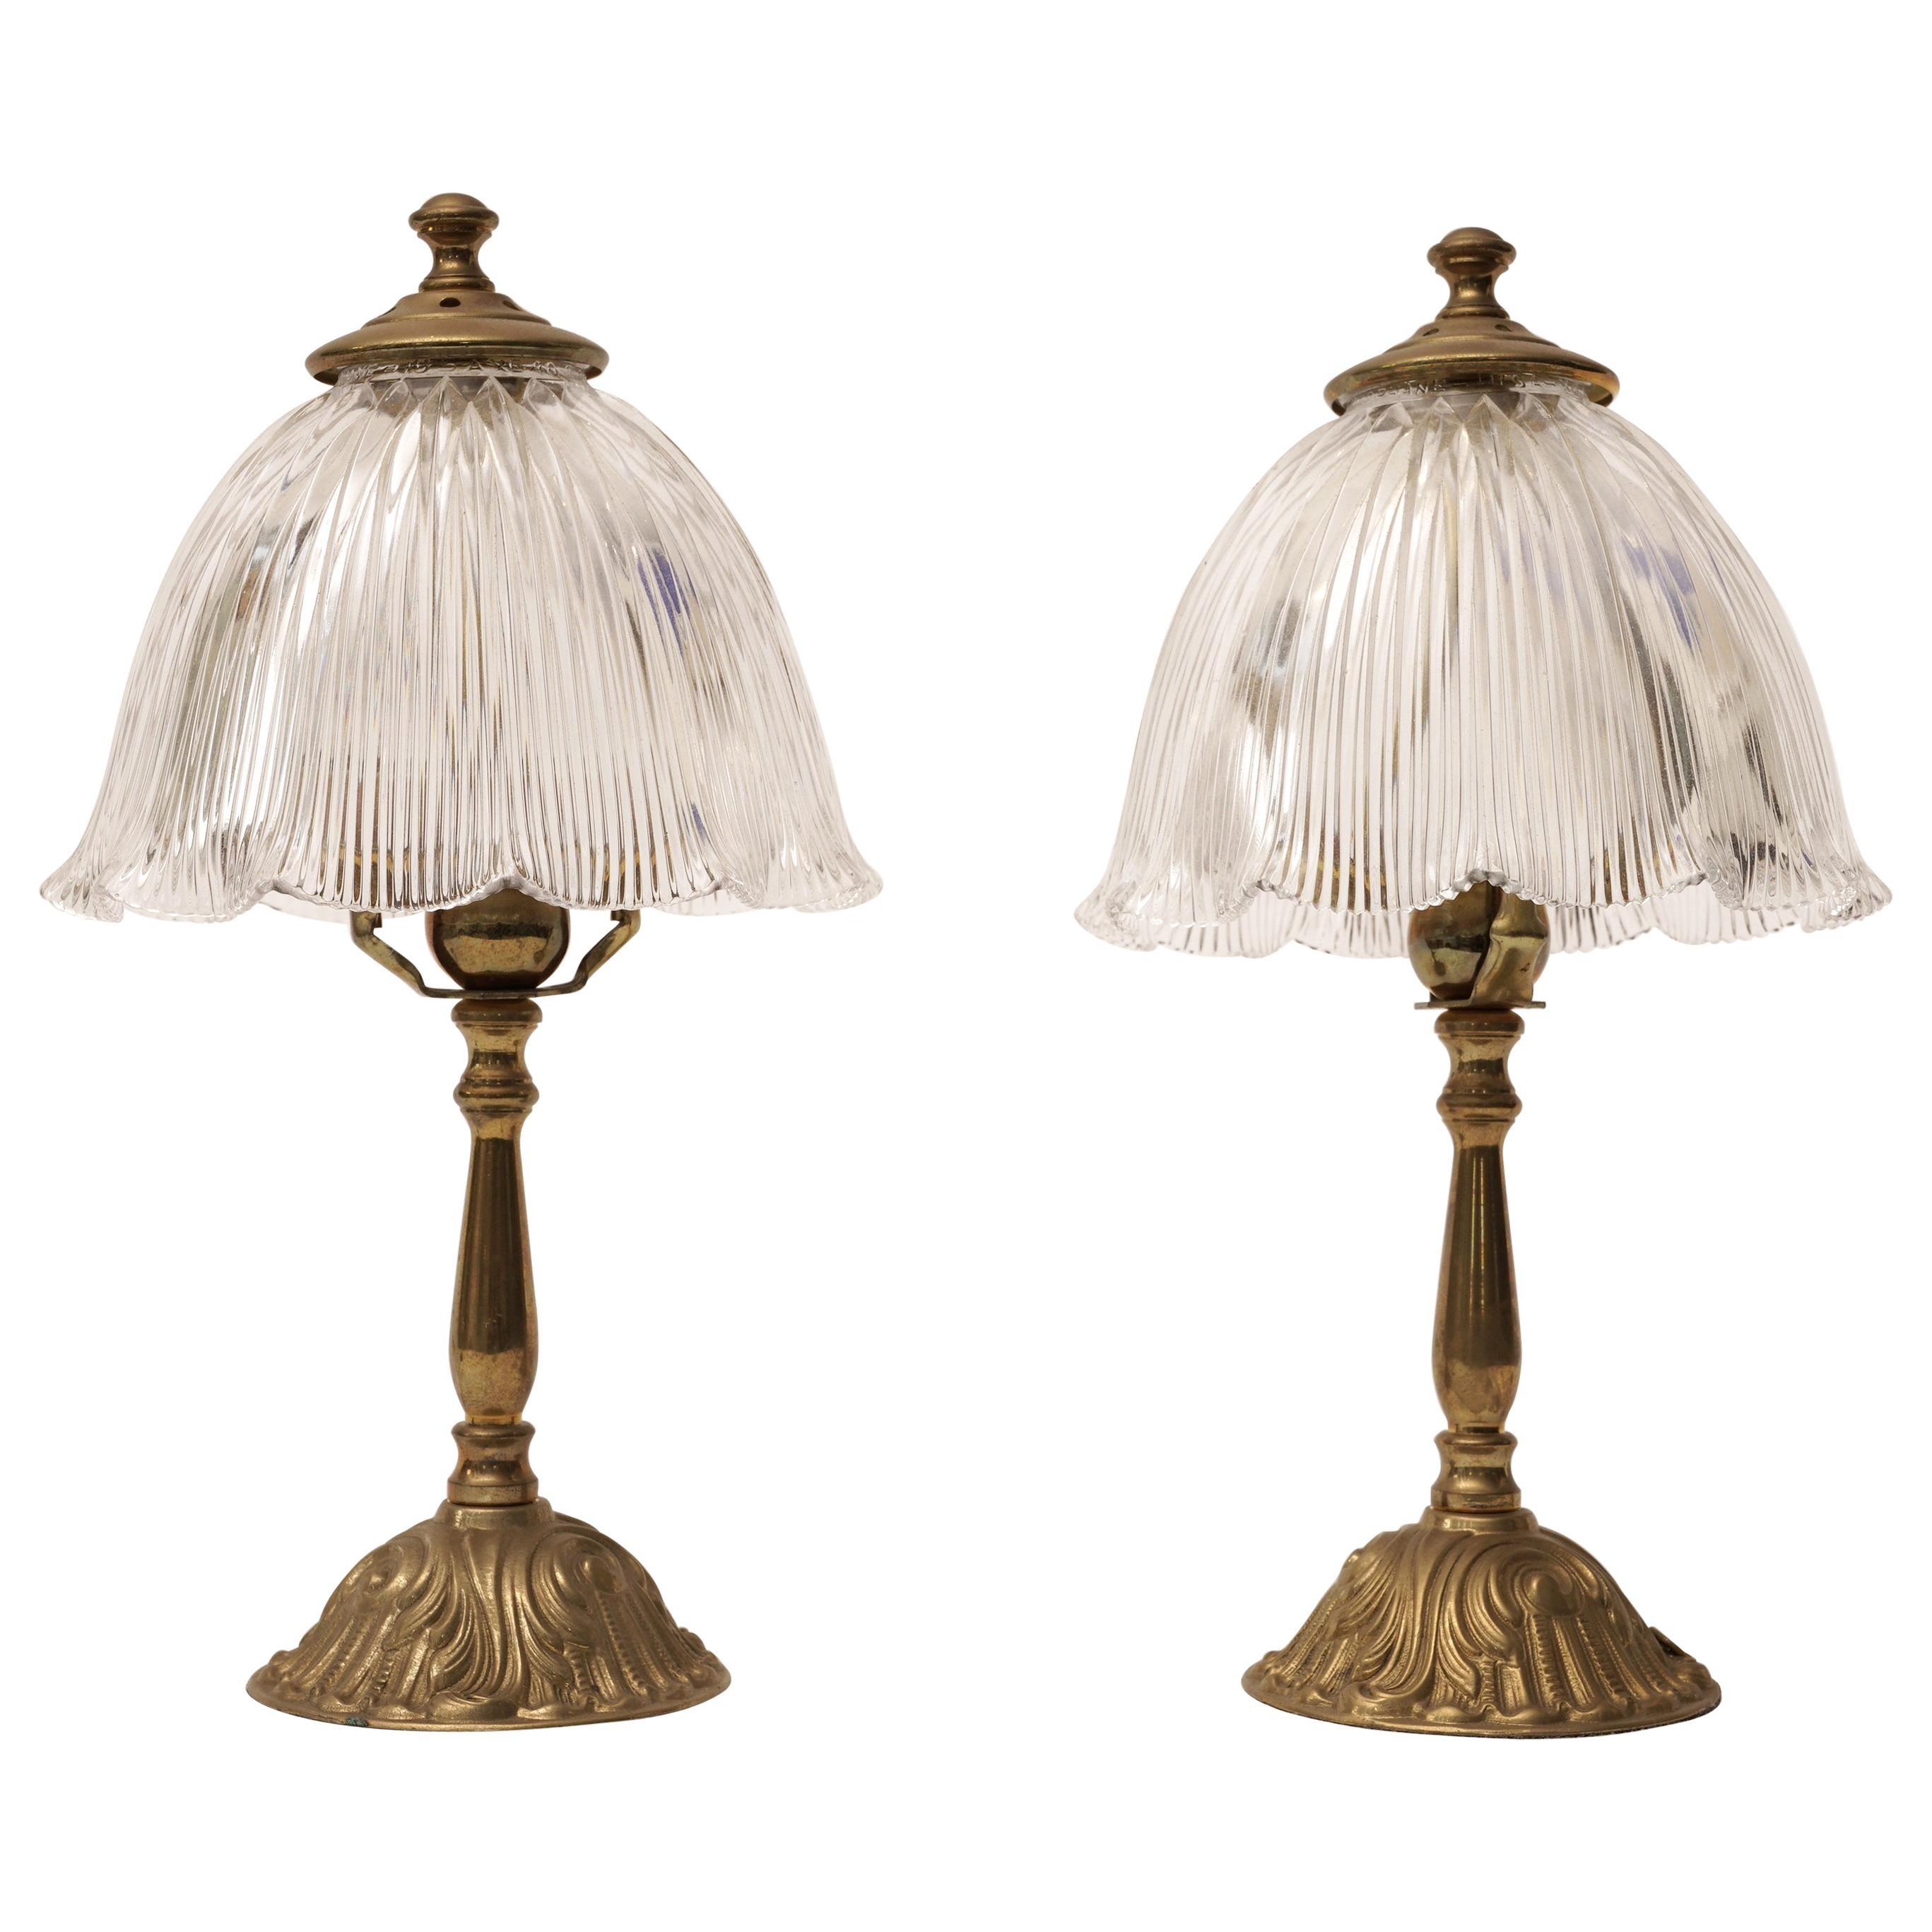 Pair of Petite Brass Table Lamps with Holophane Shades, Mid-1900s